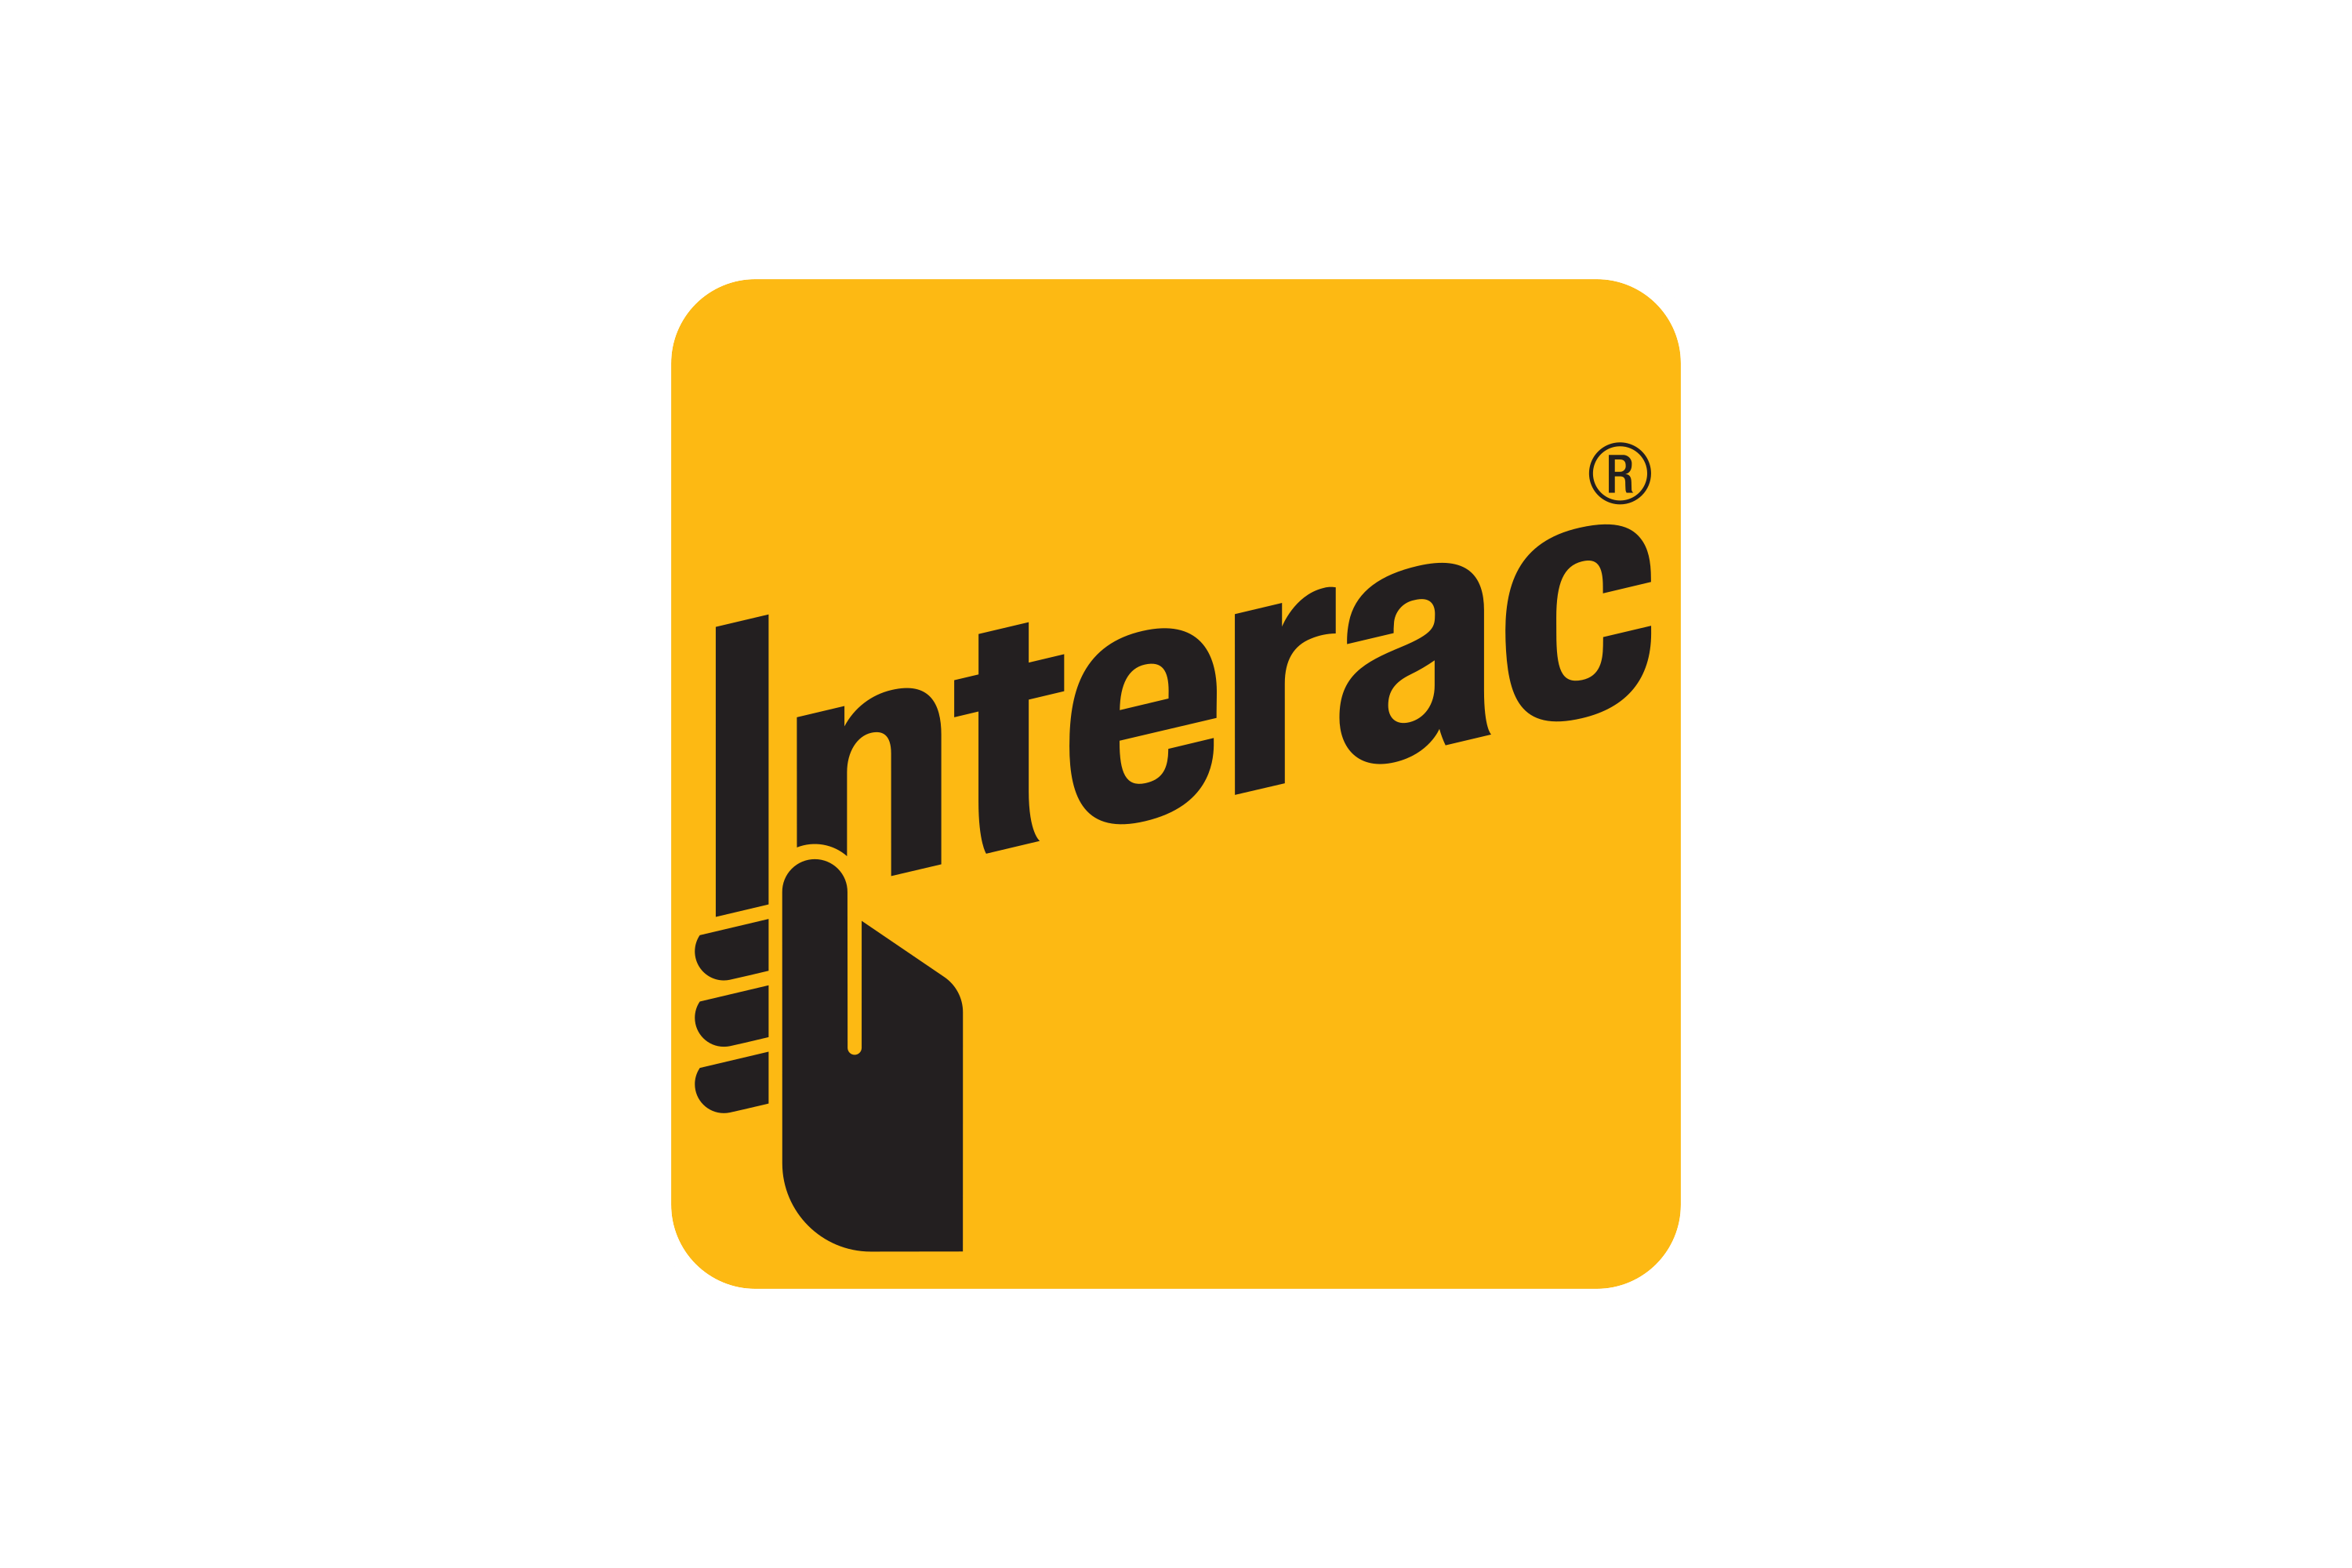 Download Interac Logo in SVG Vector or PNG File Format - Logo.wine